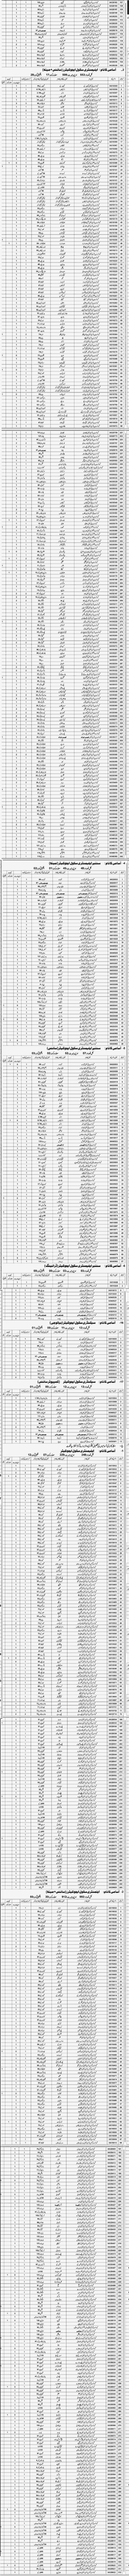 2016-11-21-educators-jobs-in-sialkot-from-education-department-punjab-via-nts-2408-opportunities-2